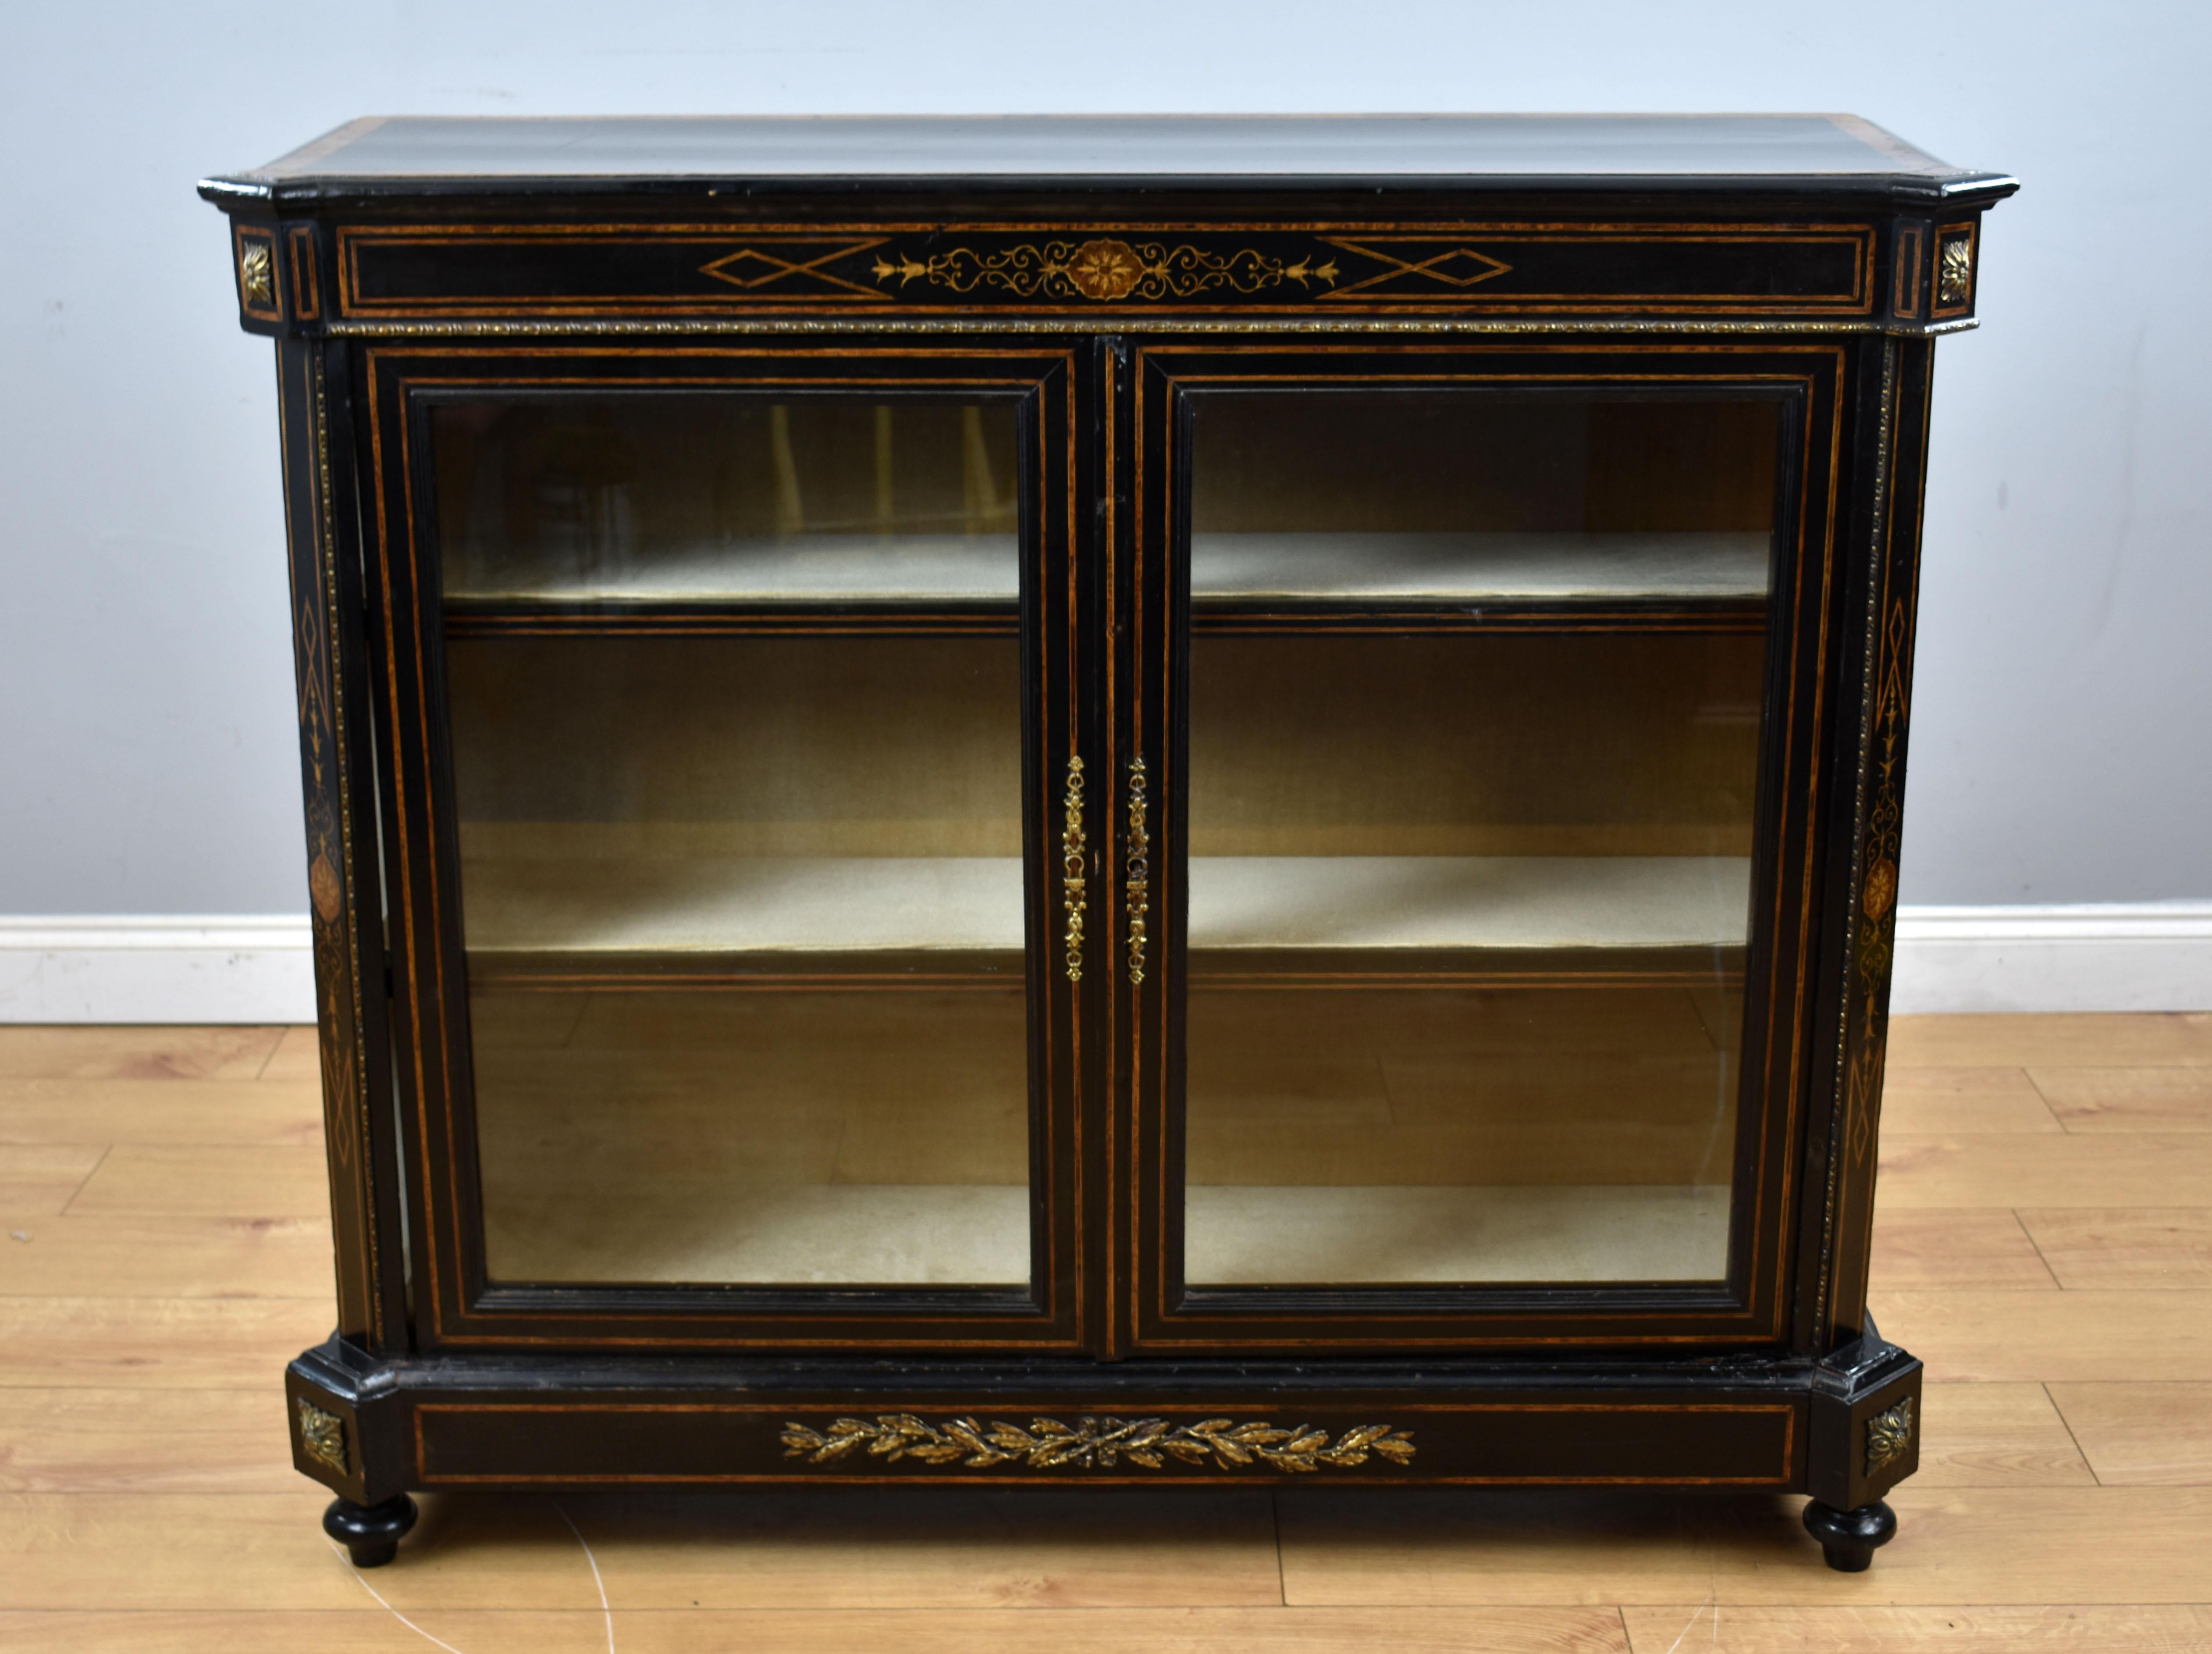 For sale is a Victorian ebonised pier cabinet, having a walnut banded top, above two glazed doors opening to a fabric lined the interior, the cabinet is inlaid throughout and stands on small turned feet. The cabinet is in good condition, showing